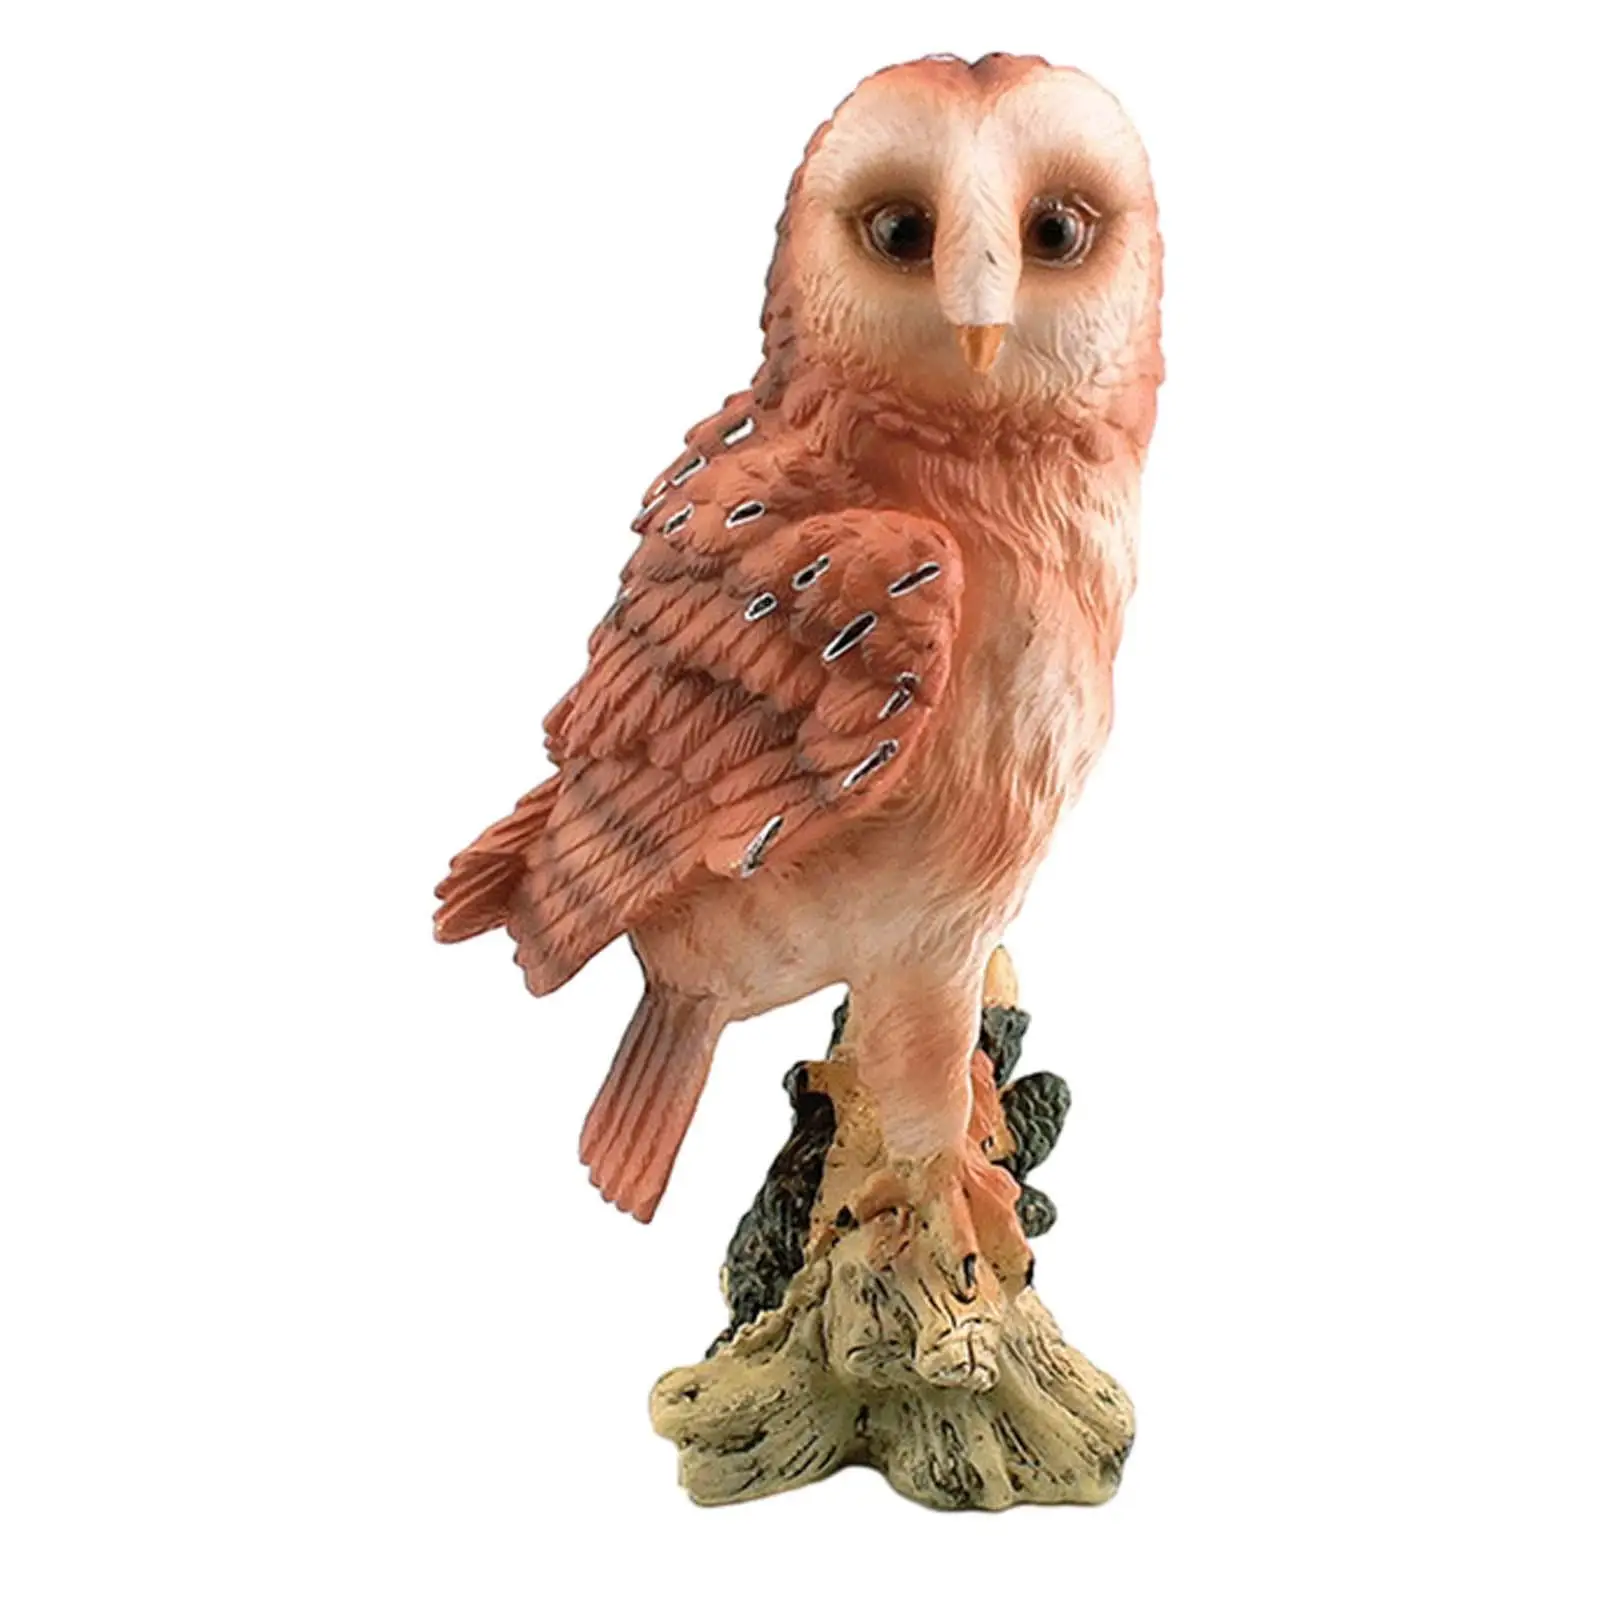 Realistic Owl Sculpture Educational Toys Owl Statue Sculptures for Decor Birthday Gift Ornaments Educational Garden Yard Decors